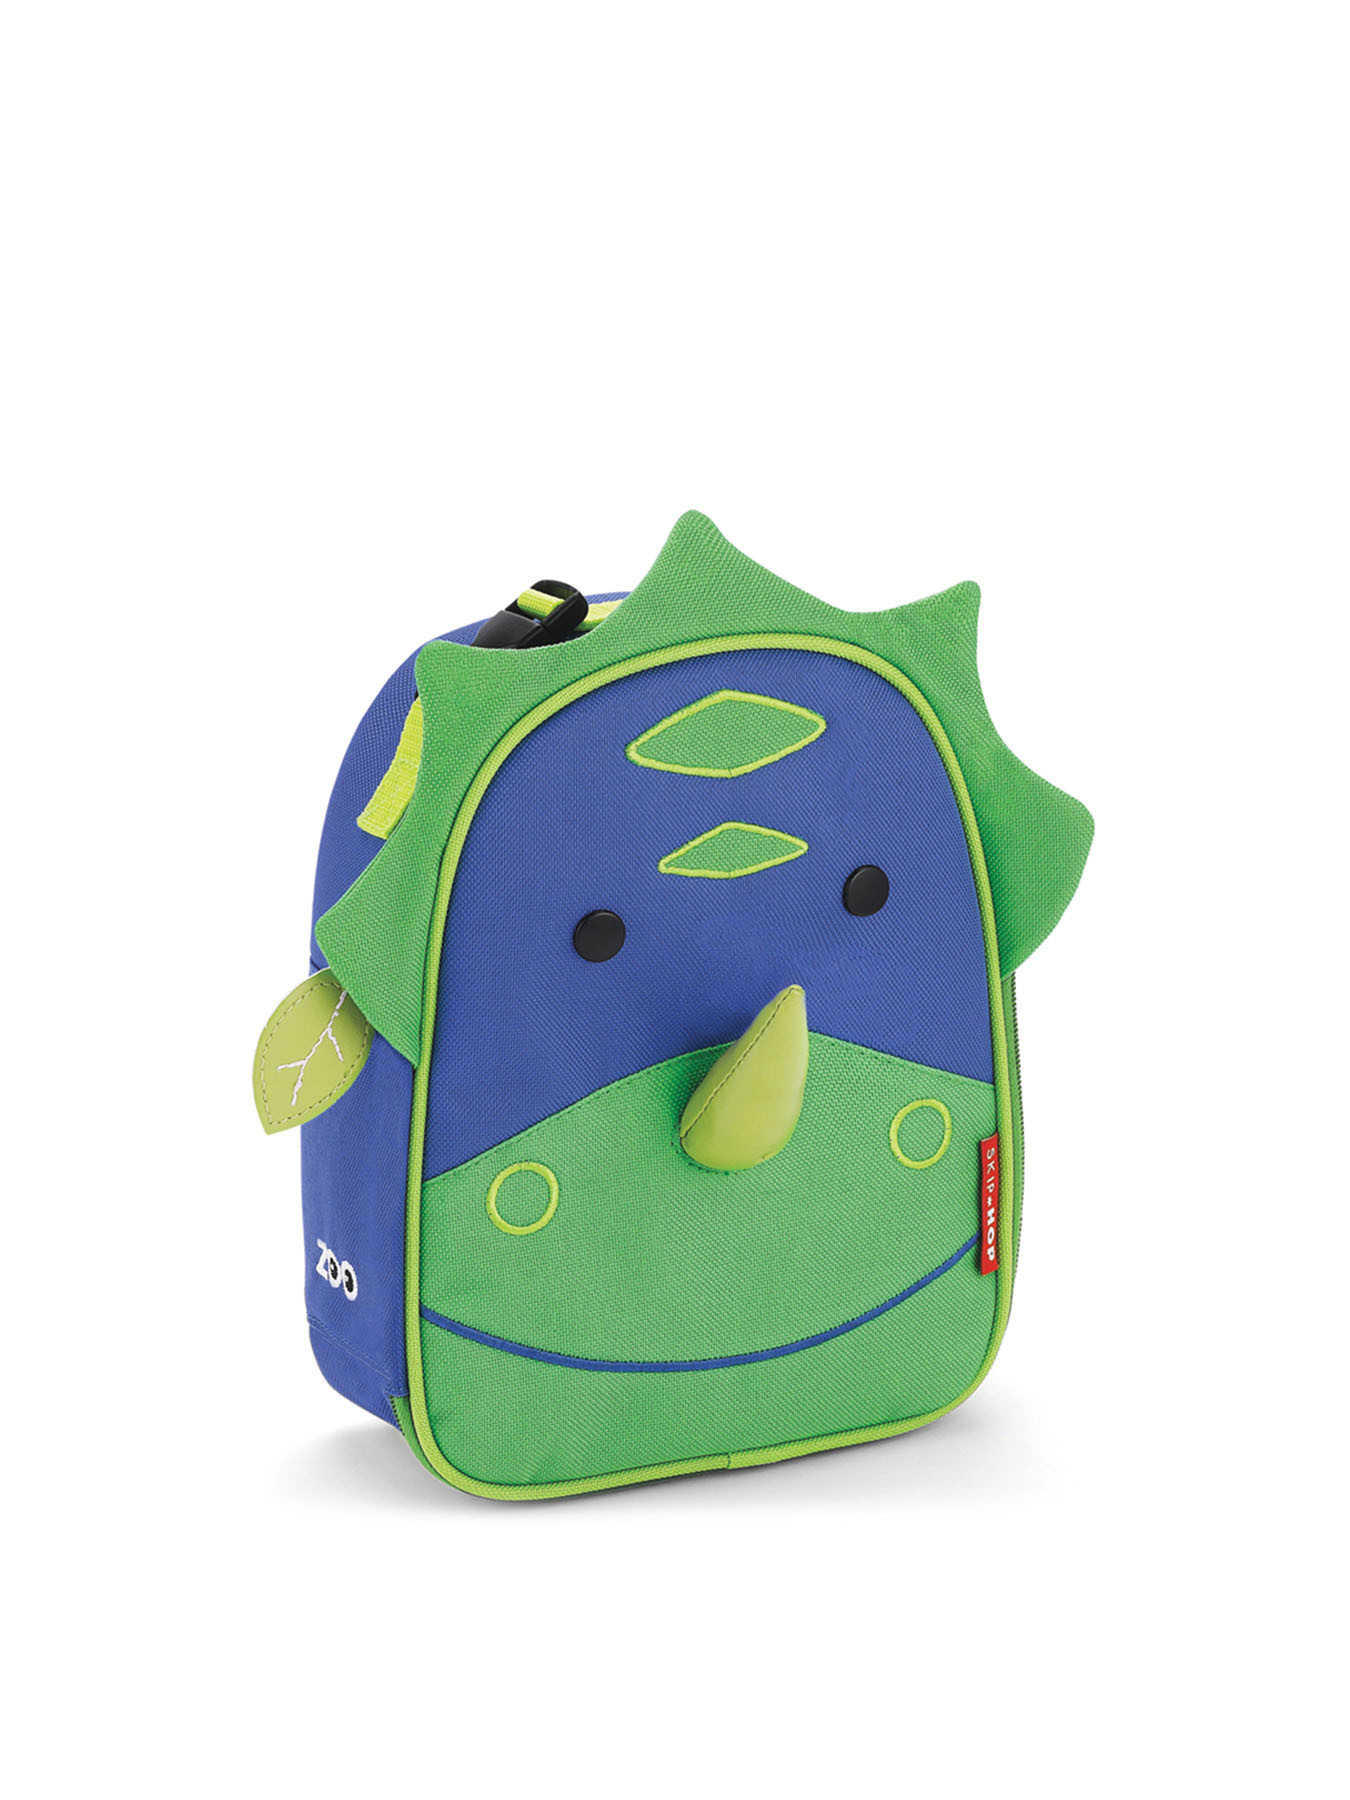 Tiddler Kids Lunch Bag / Lunch Box | Insulated & Double Zipped | Carry –  Tiddlers & Nippers Ltd